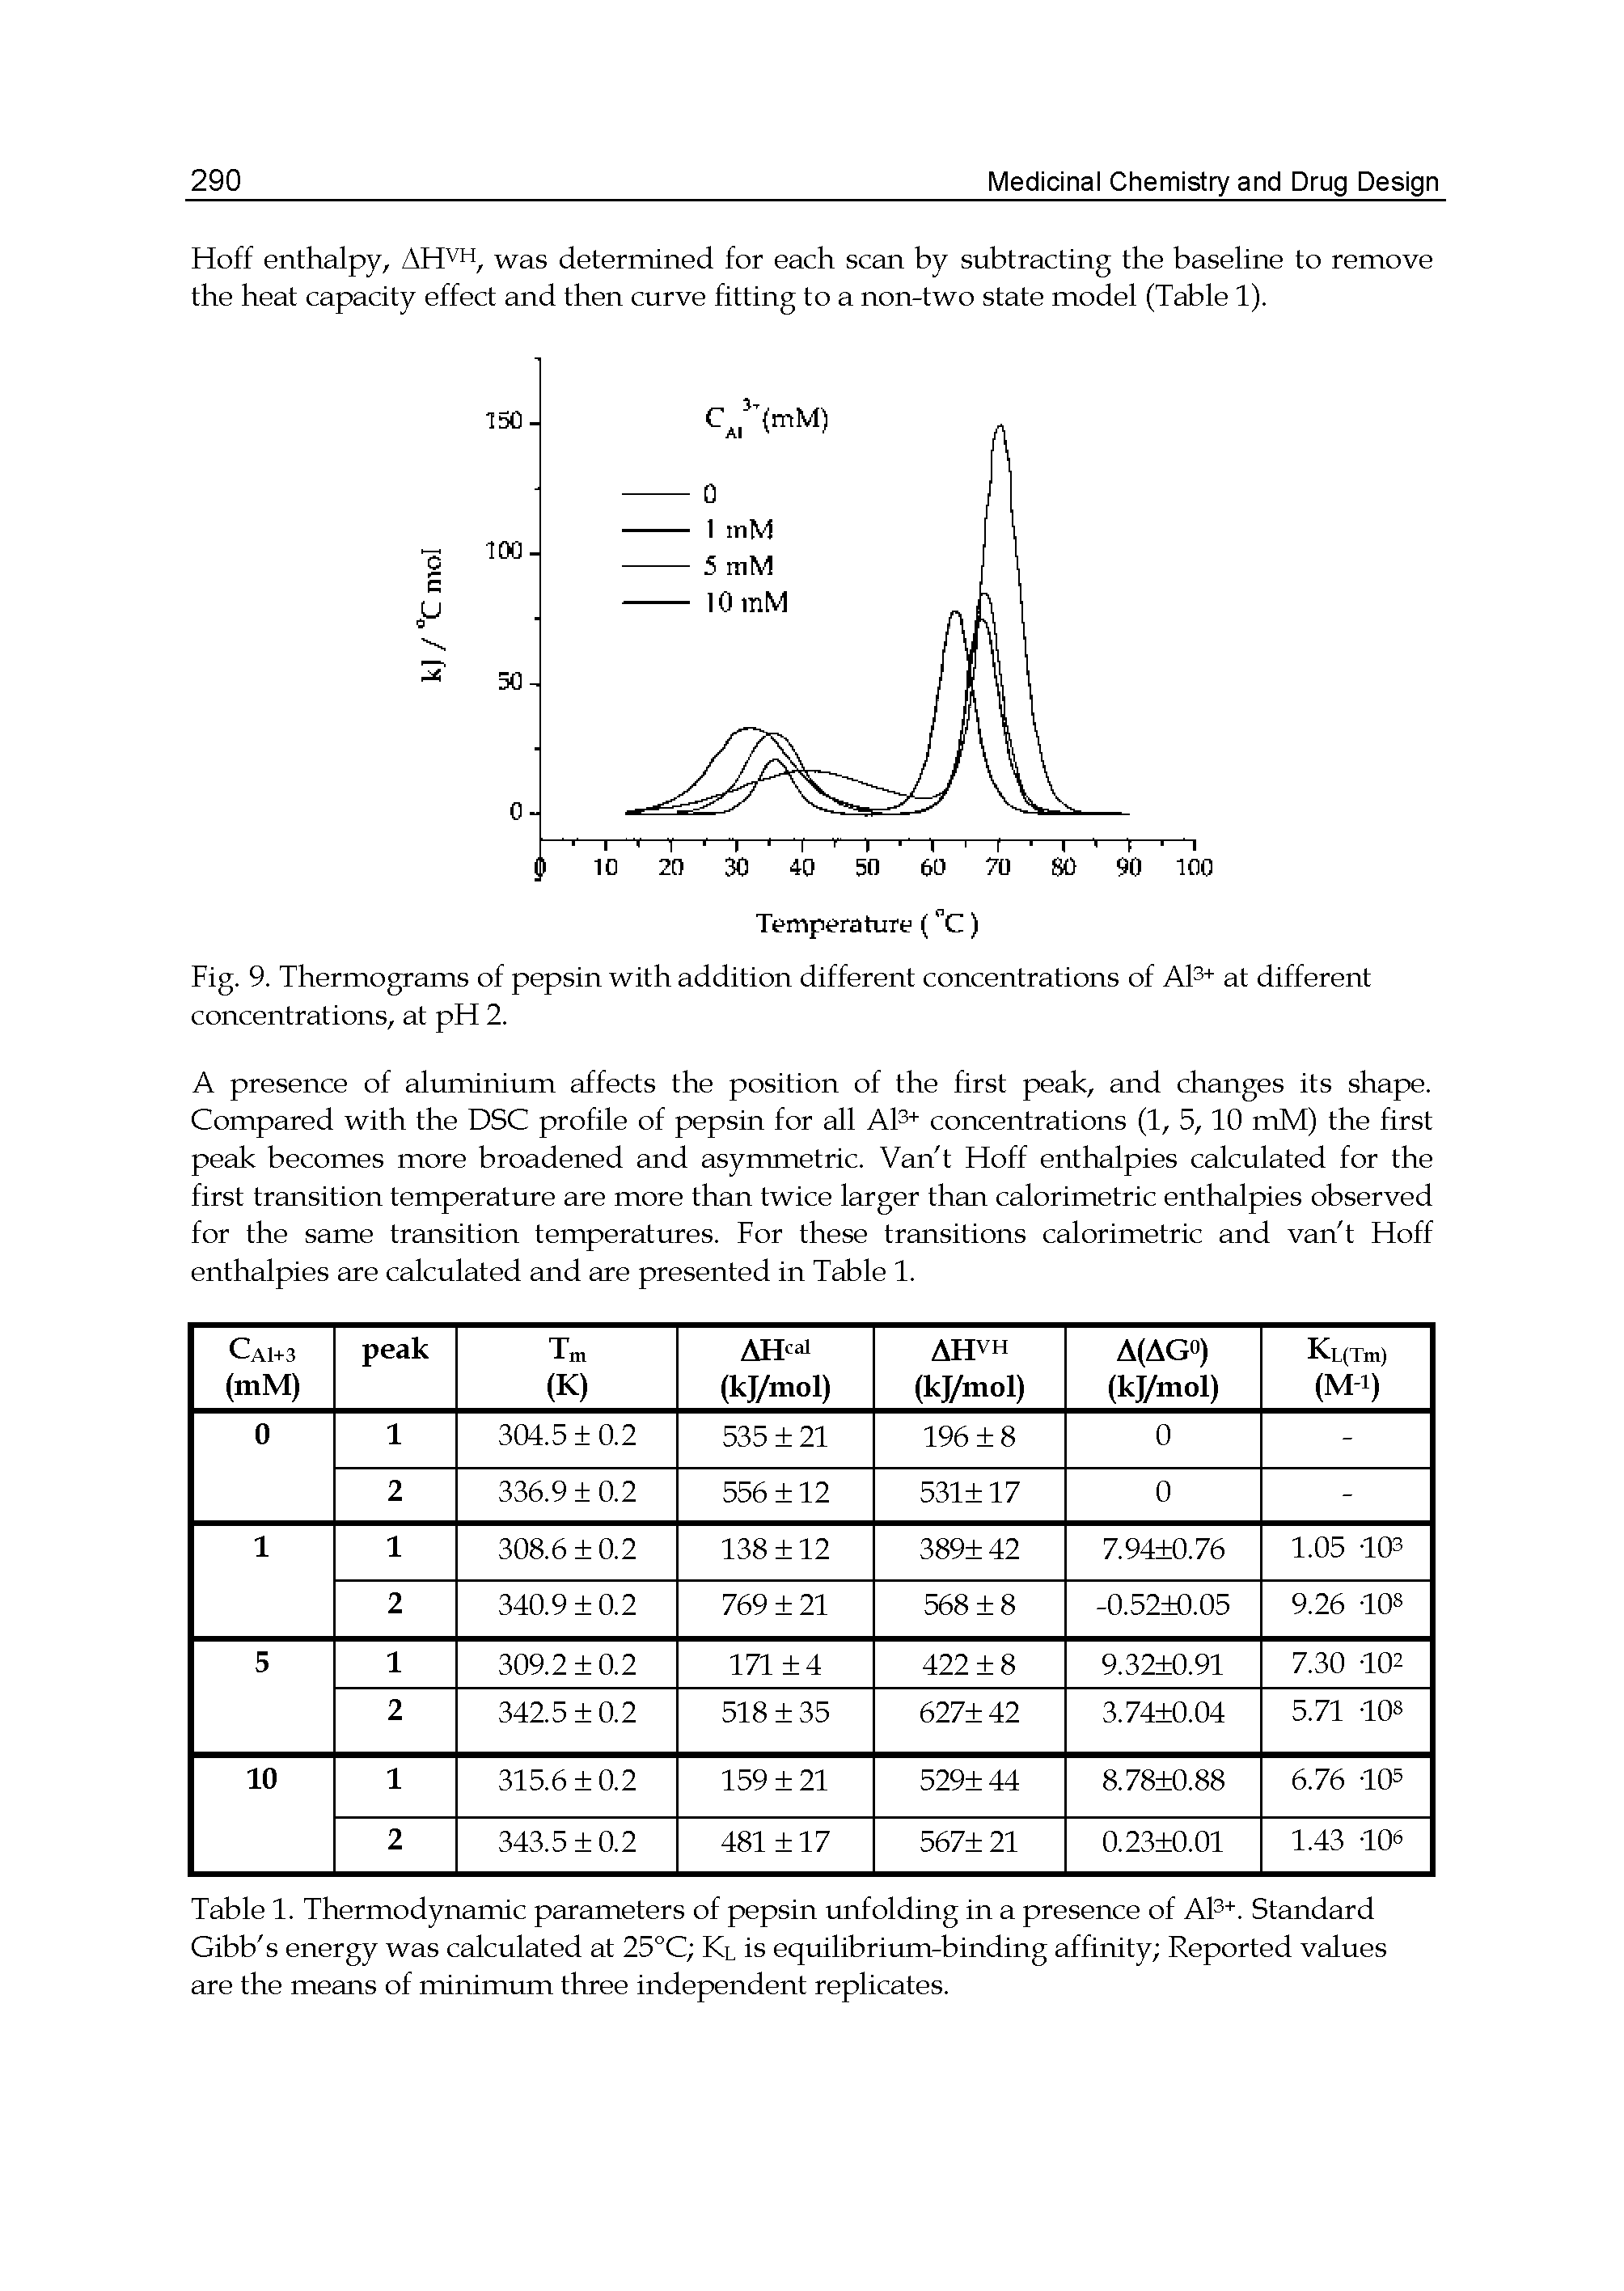 Table 1. Thermodynamic parameters of pepsin unfolding in a presence of Ak+. Standard Gibb s energy was calculated at 25°C Kl is equilibrium-binding affinity Reported values are the means of minimum three independent replicates.